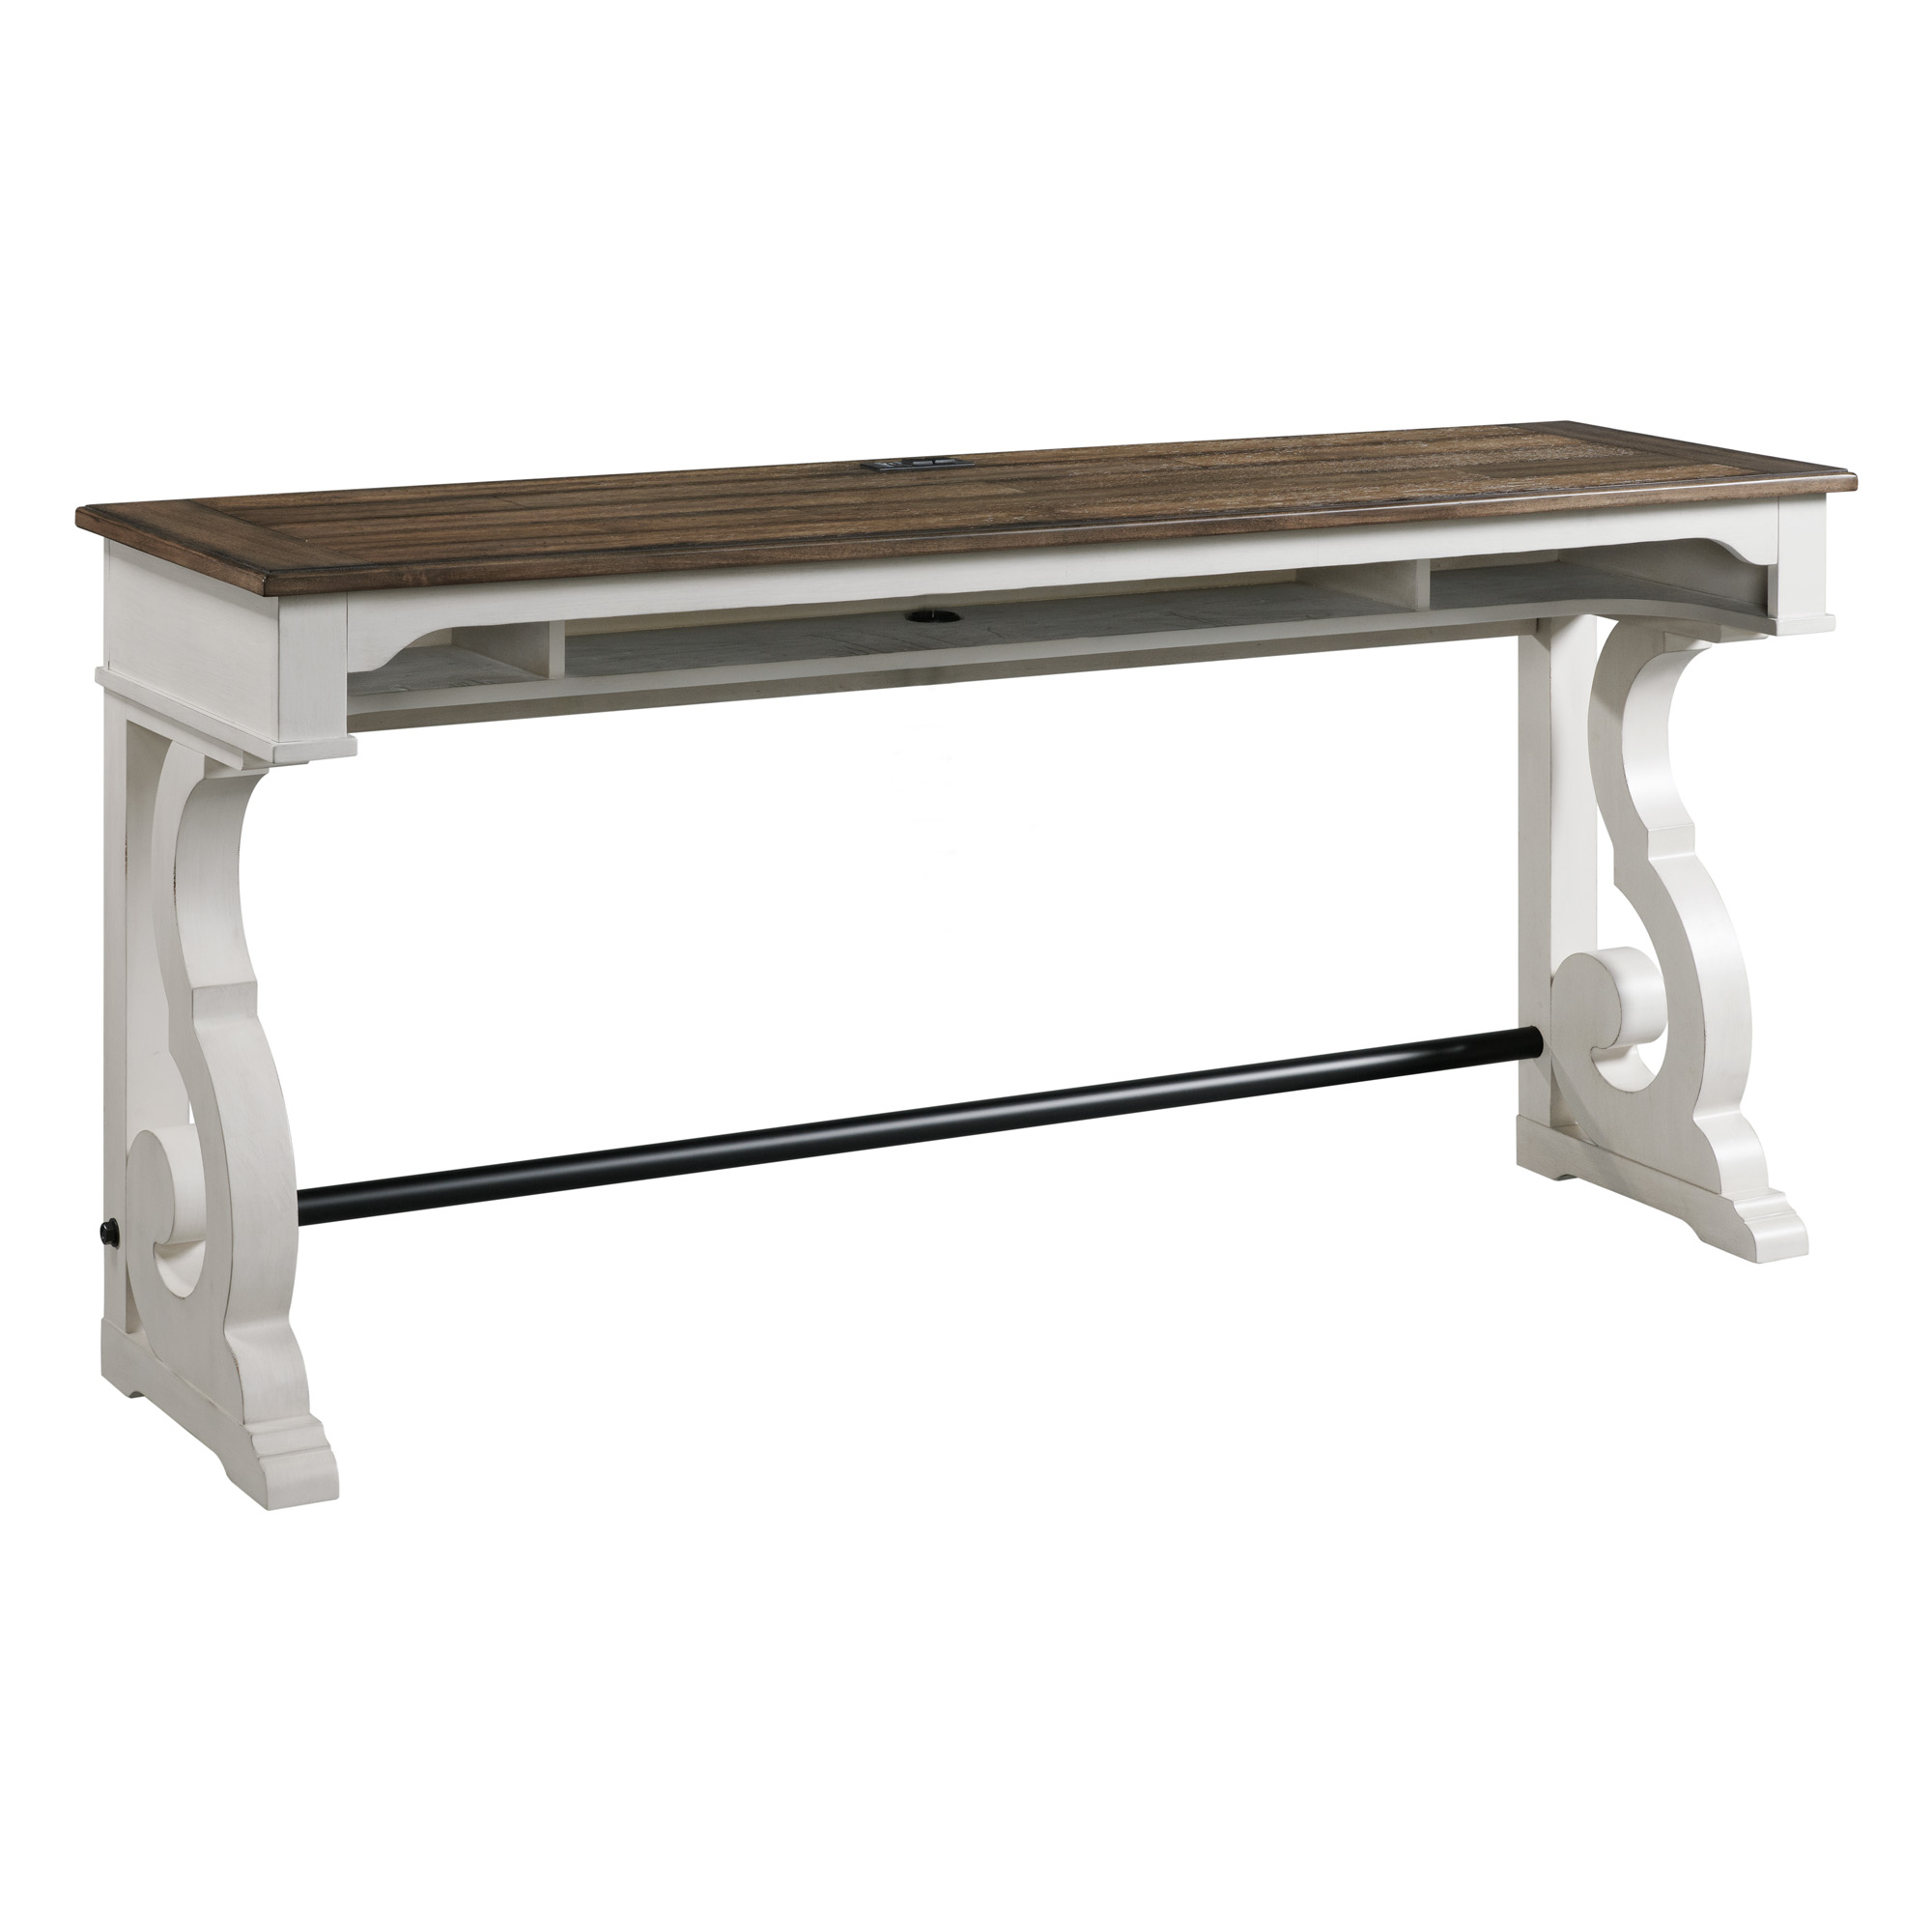 Featured image of post Sofa Table Side View / Sofa tables are a great way to utilize space in a living room.